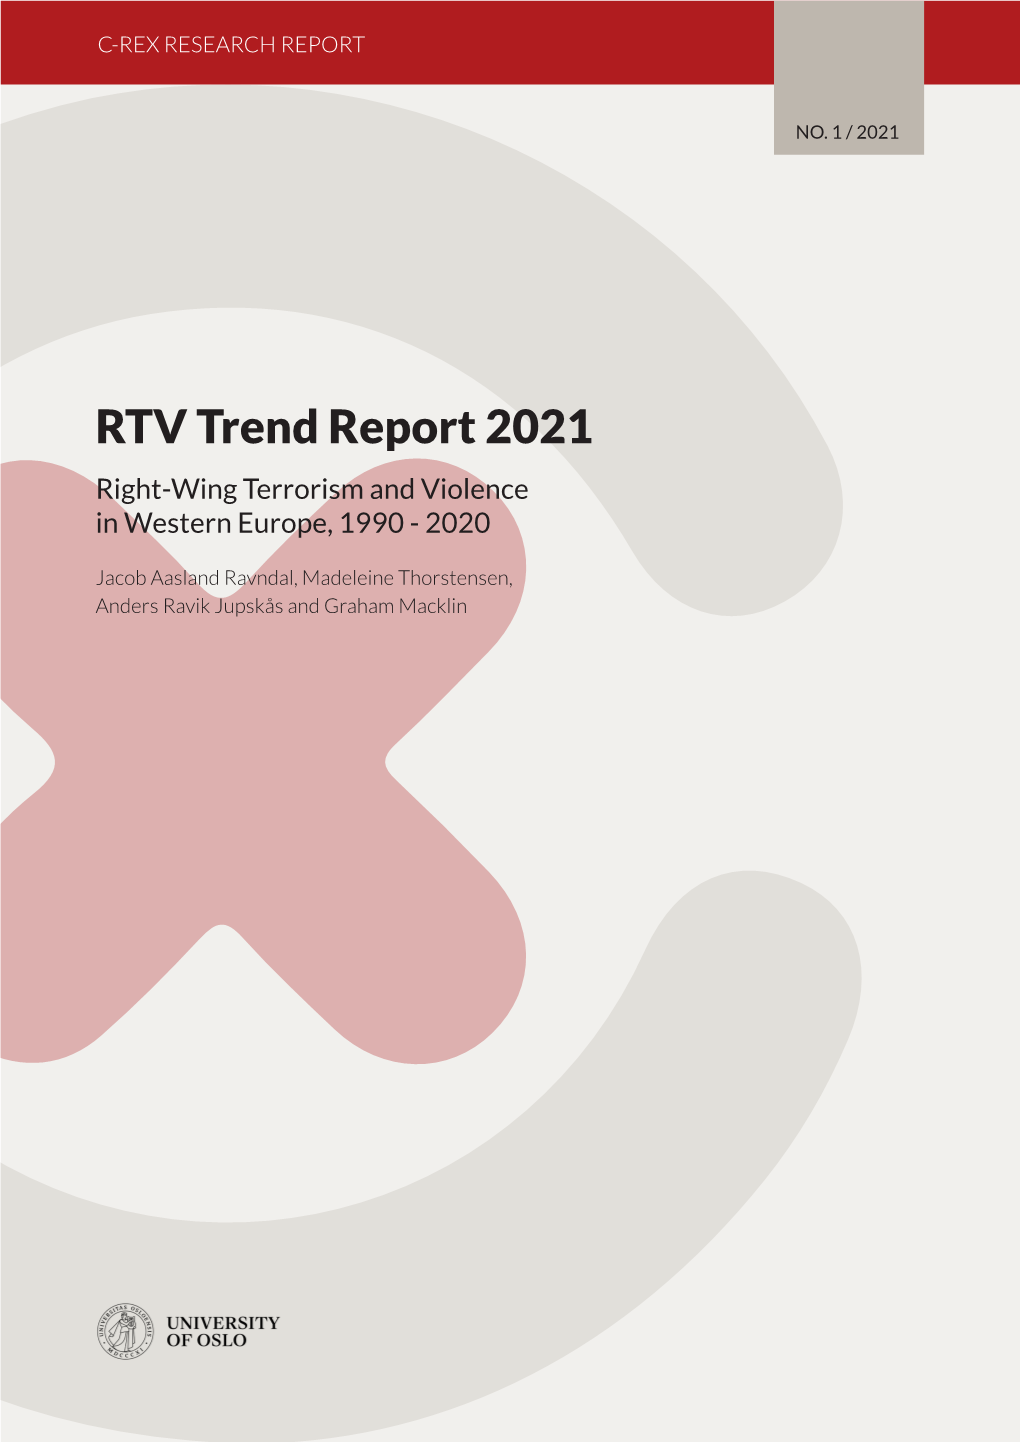 RTV Trend Report 2021 Right-Wing Terrorism and Violence in Western Europe, 1990 - 2020